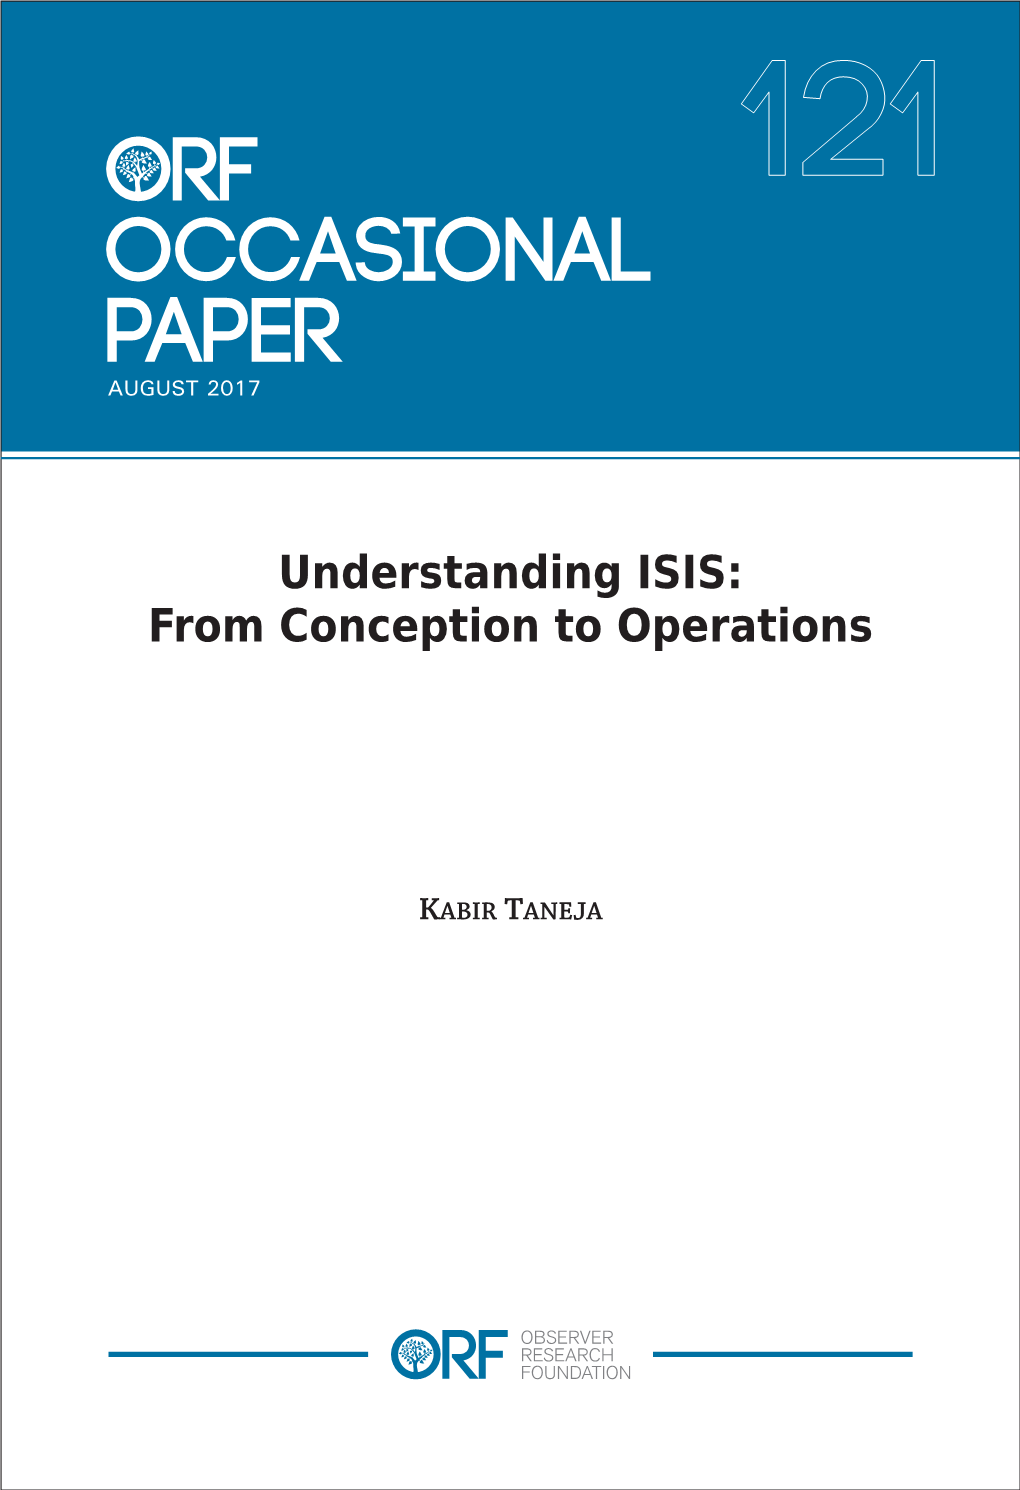 Understanding ISIS: from Conception to Operations